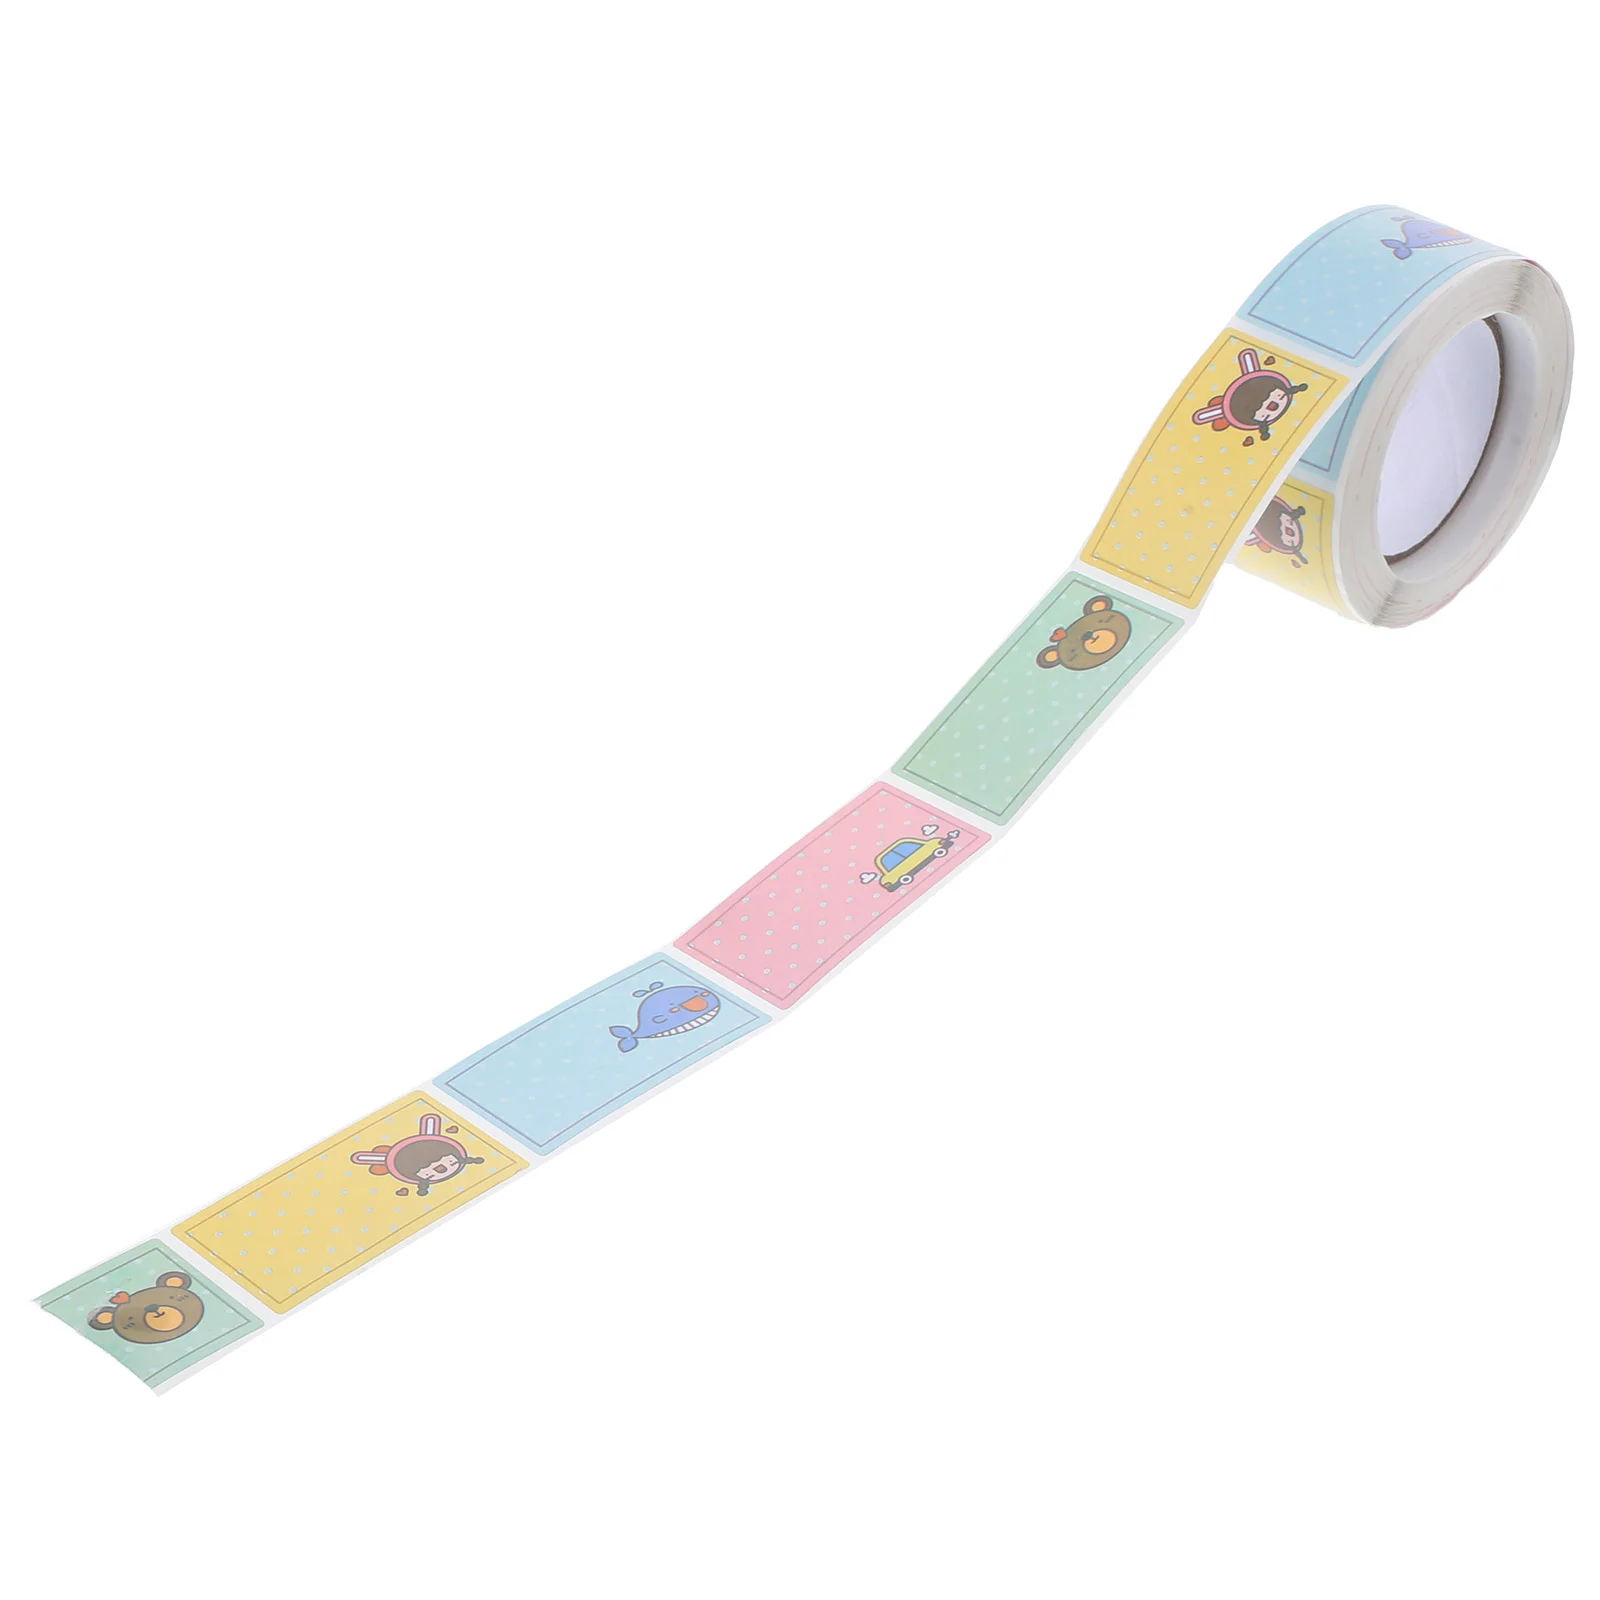 

1 Roll of Name Label Tags Colors Name Tags Classified Marking Stickers Self-adhesive Category Tags